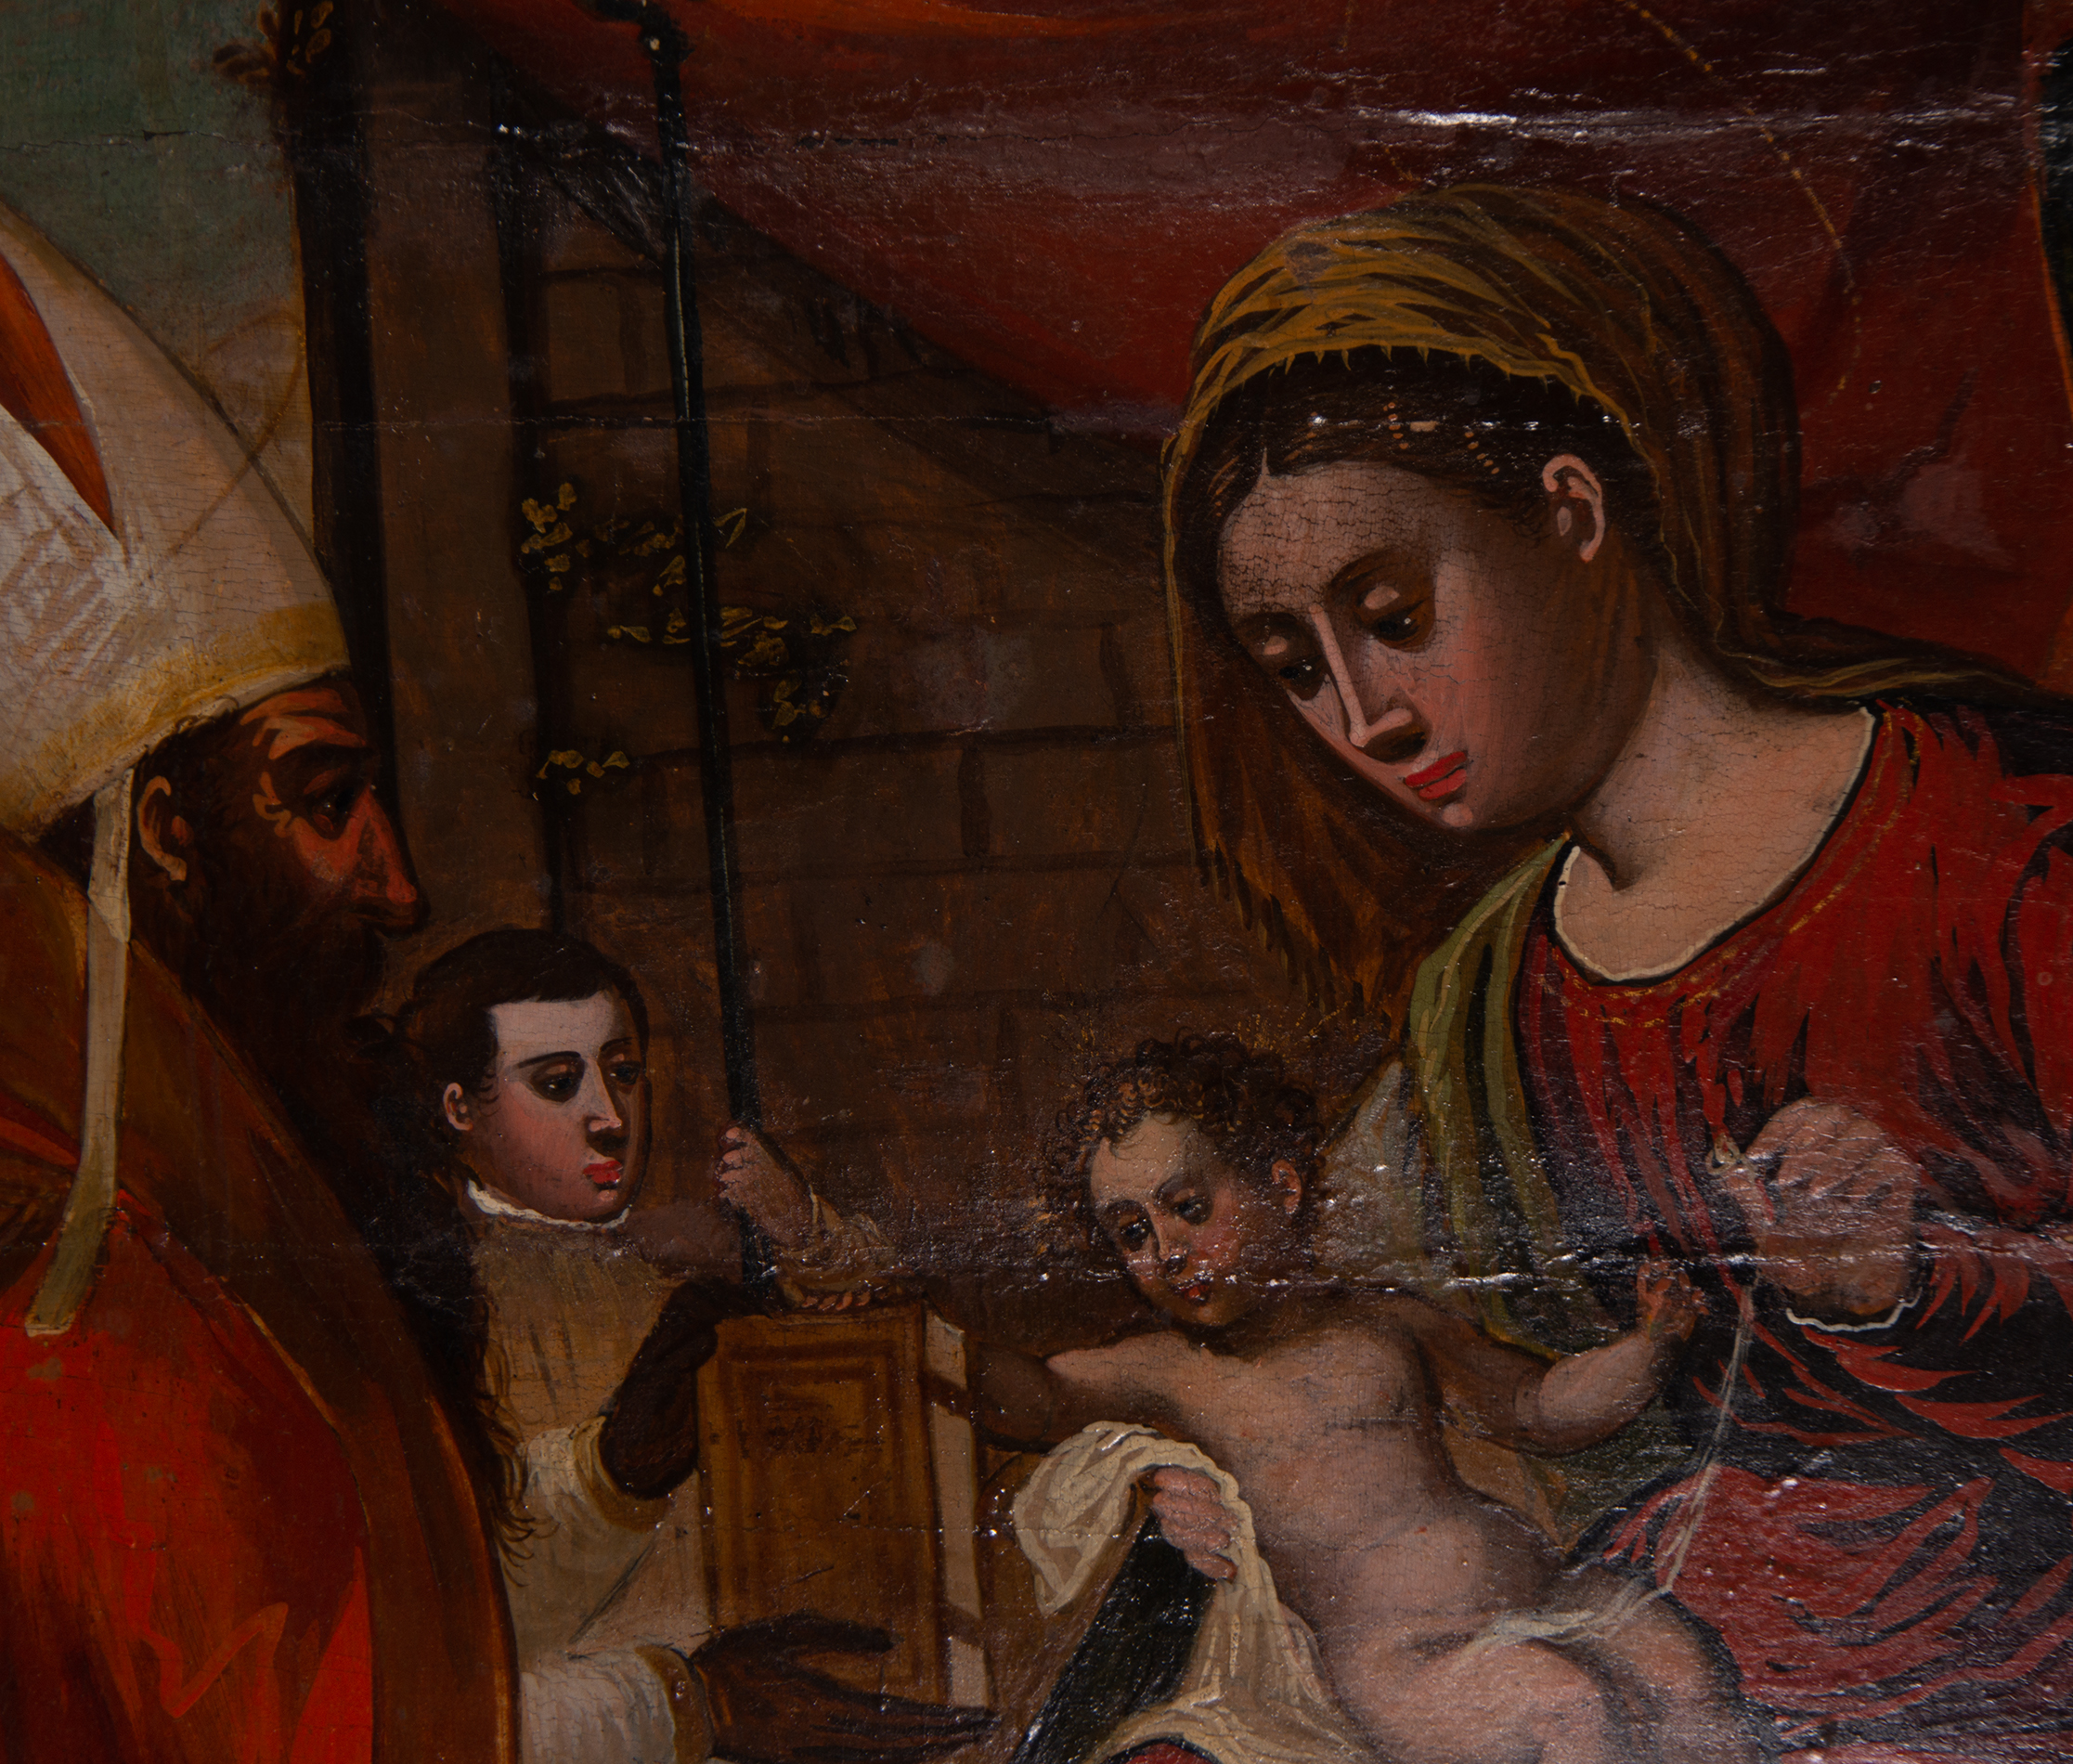 Presentation of the Child Jesus in the Temple, Italian school of the 16th century - Image 6 of 8